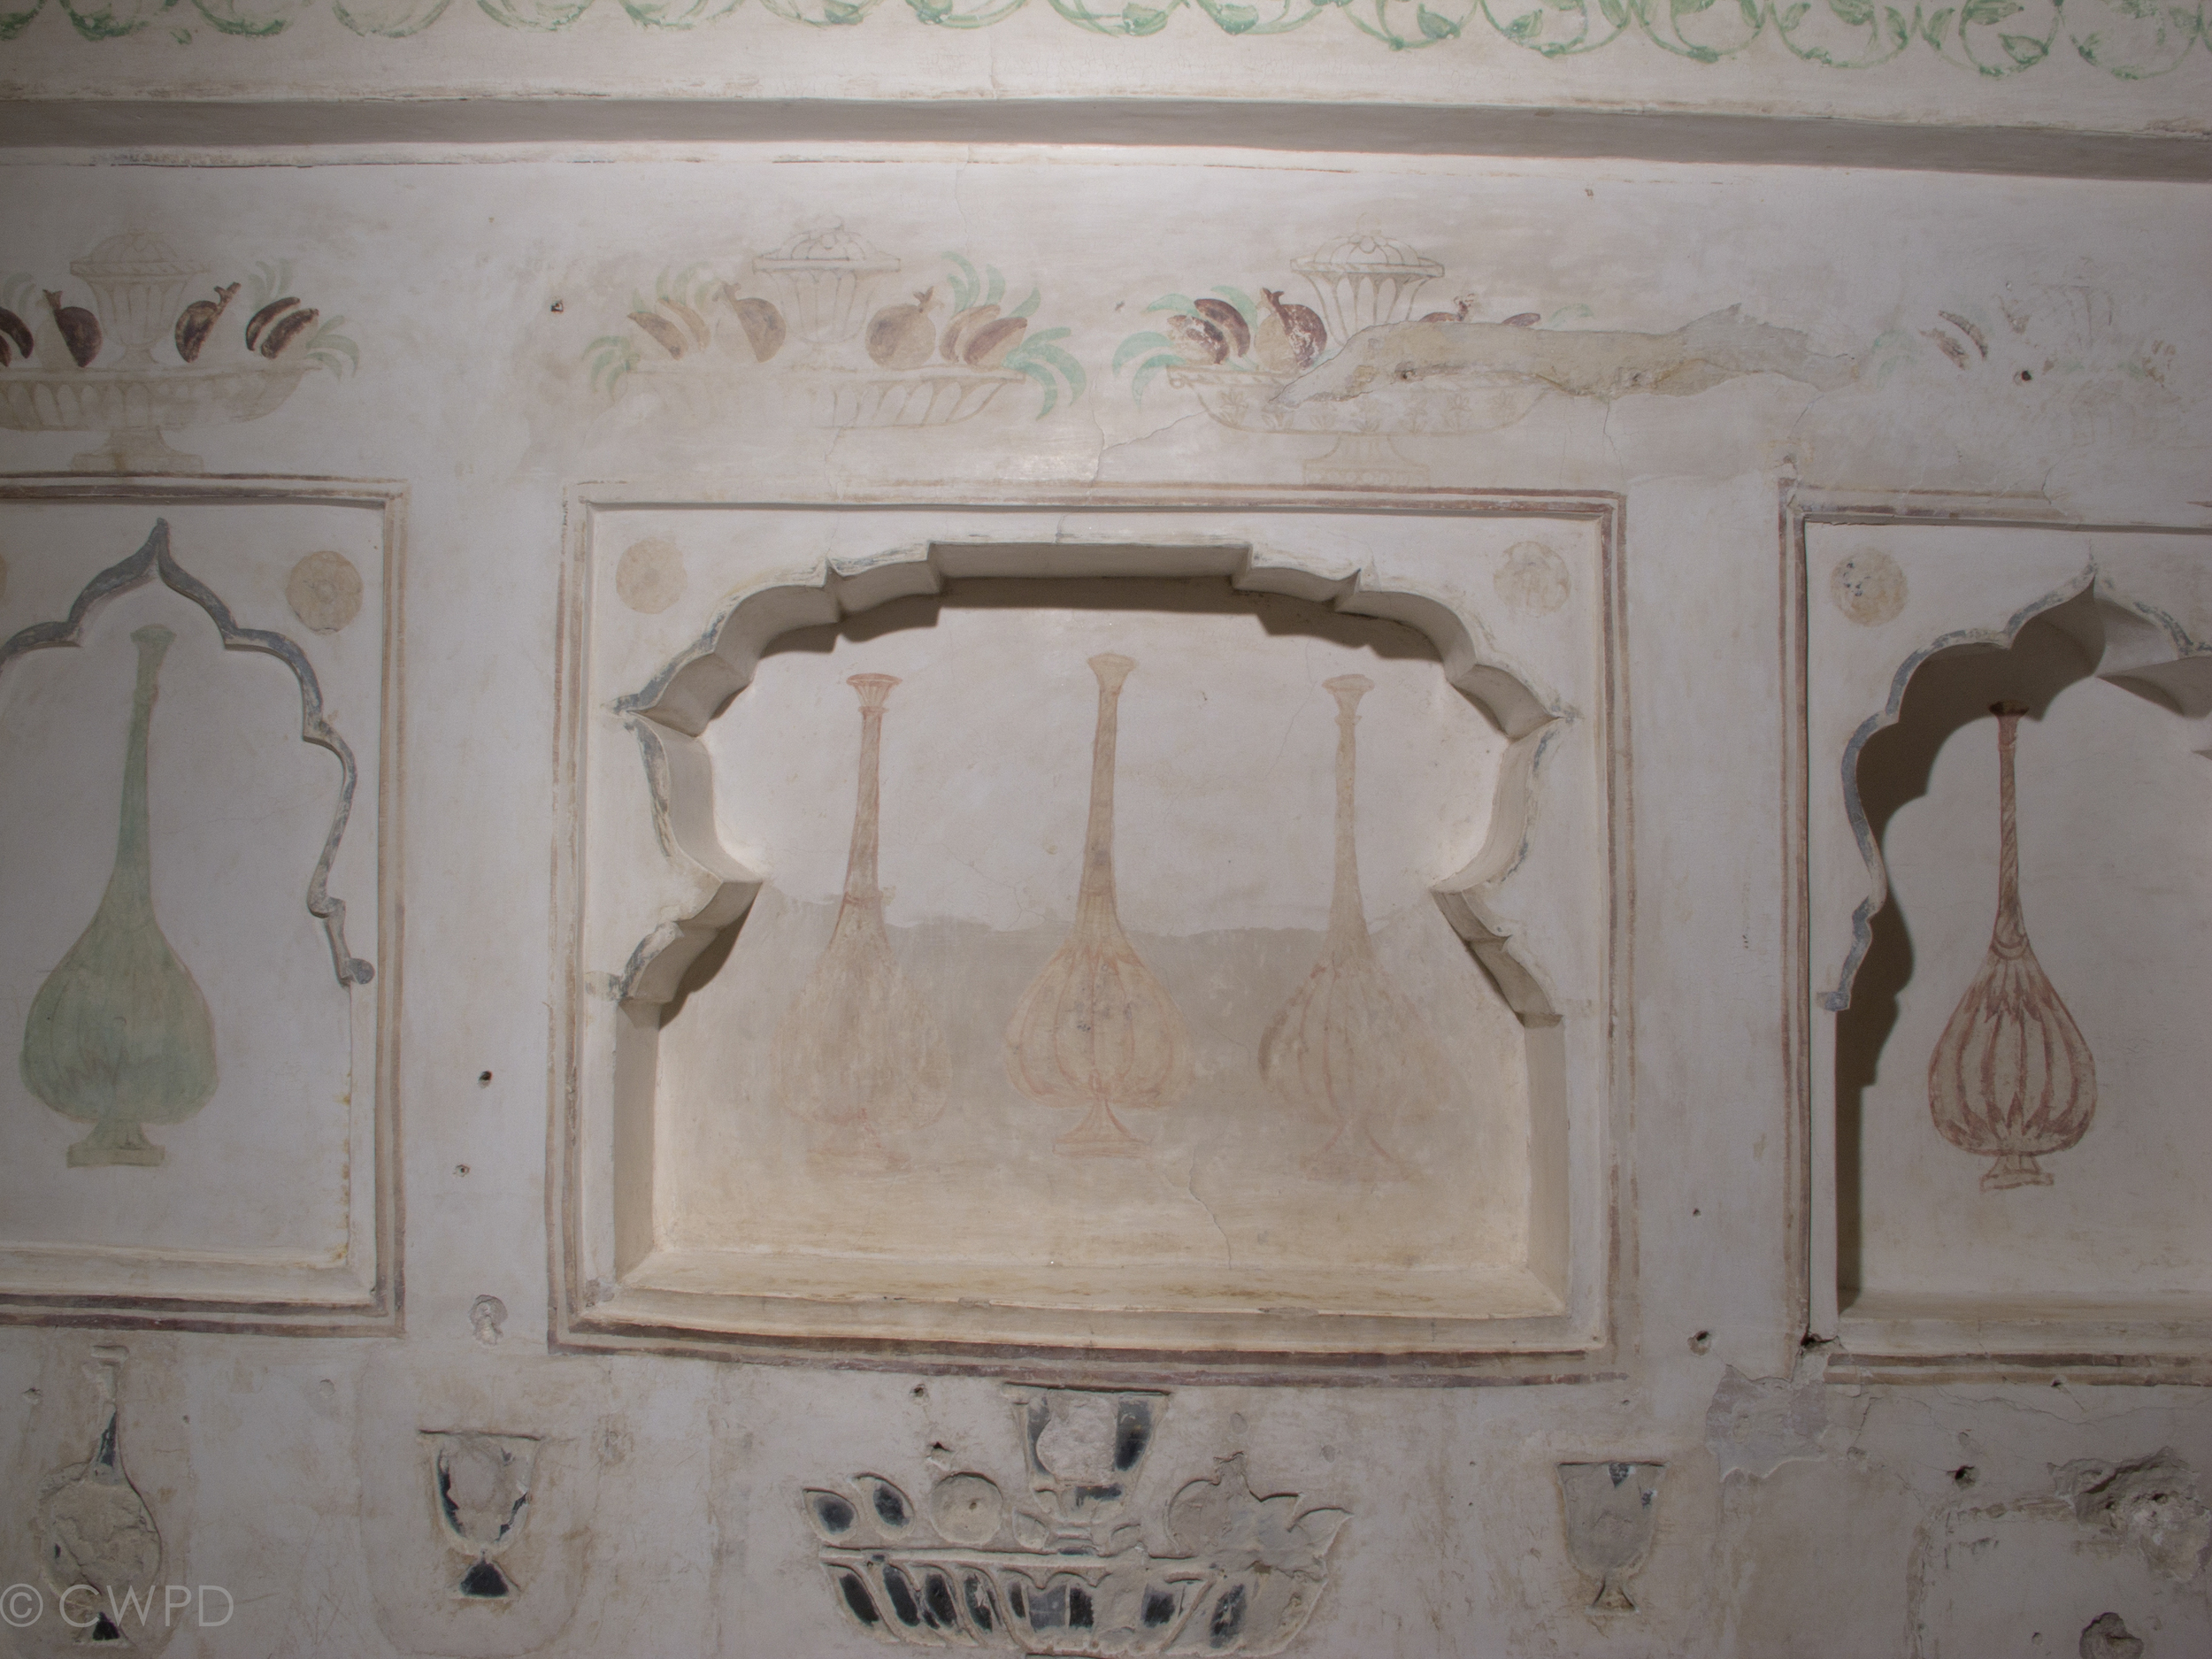  Example of a painted niche partially cleaned.&nbsp;  Image © Courtauld CWPD 